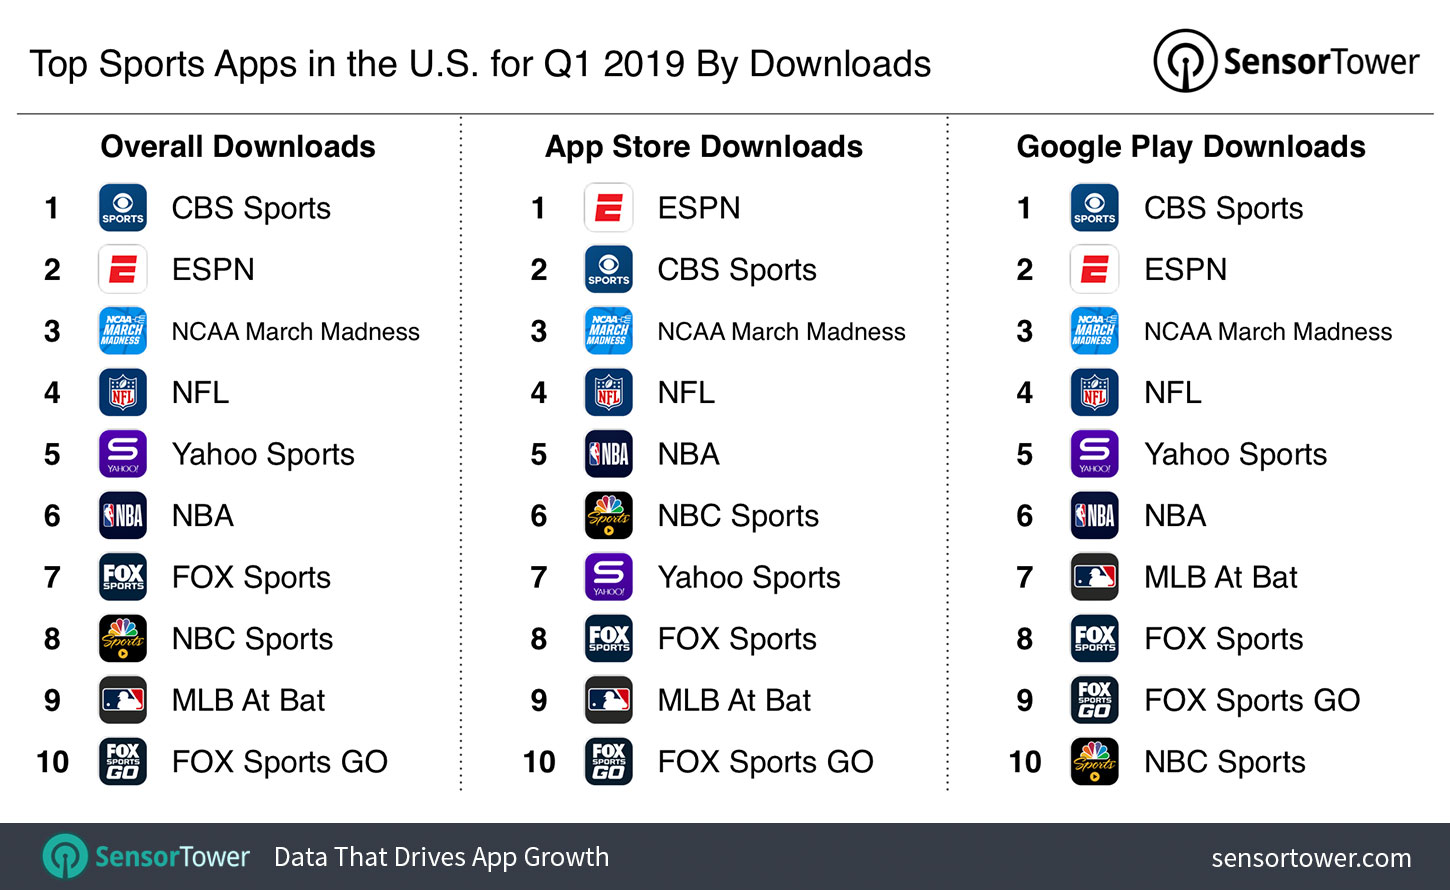 Top Sports Apps in the U.S. for Q1 2019 by Downloads